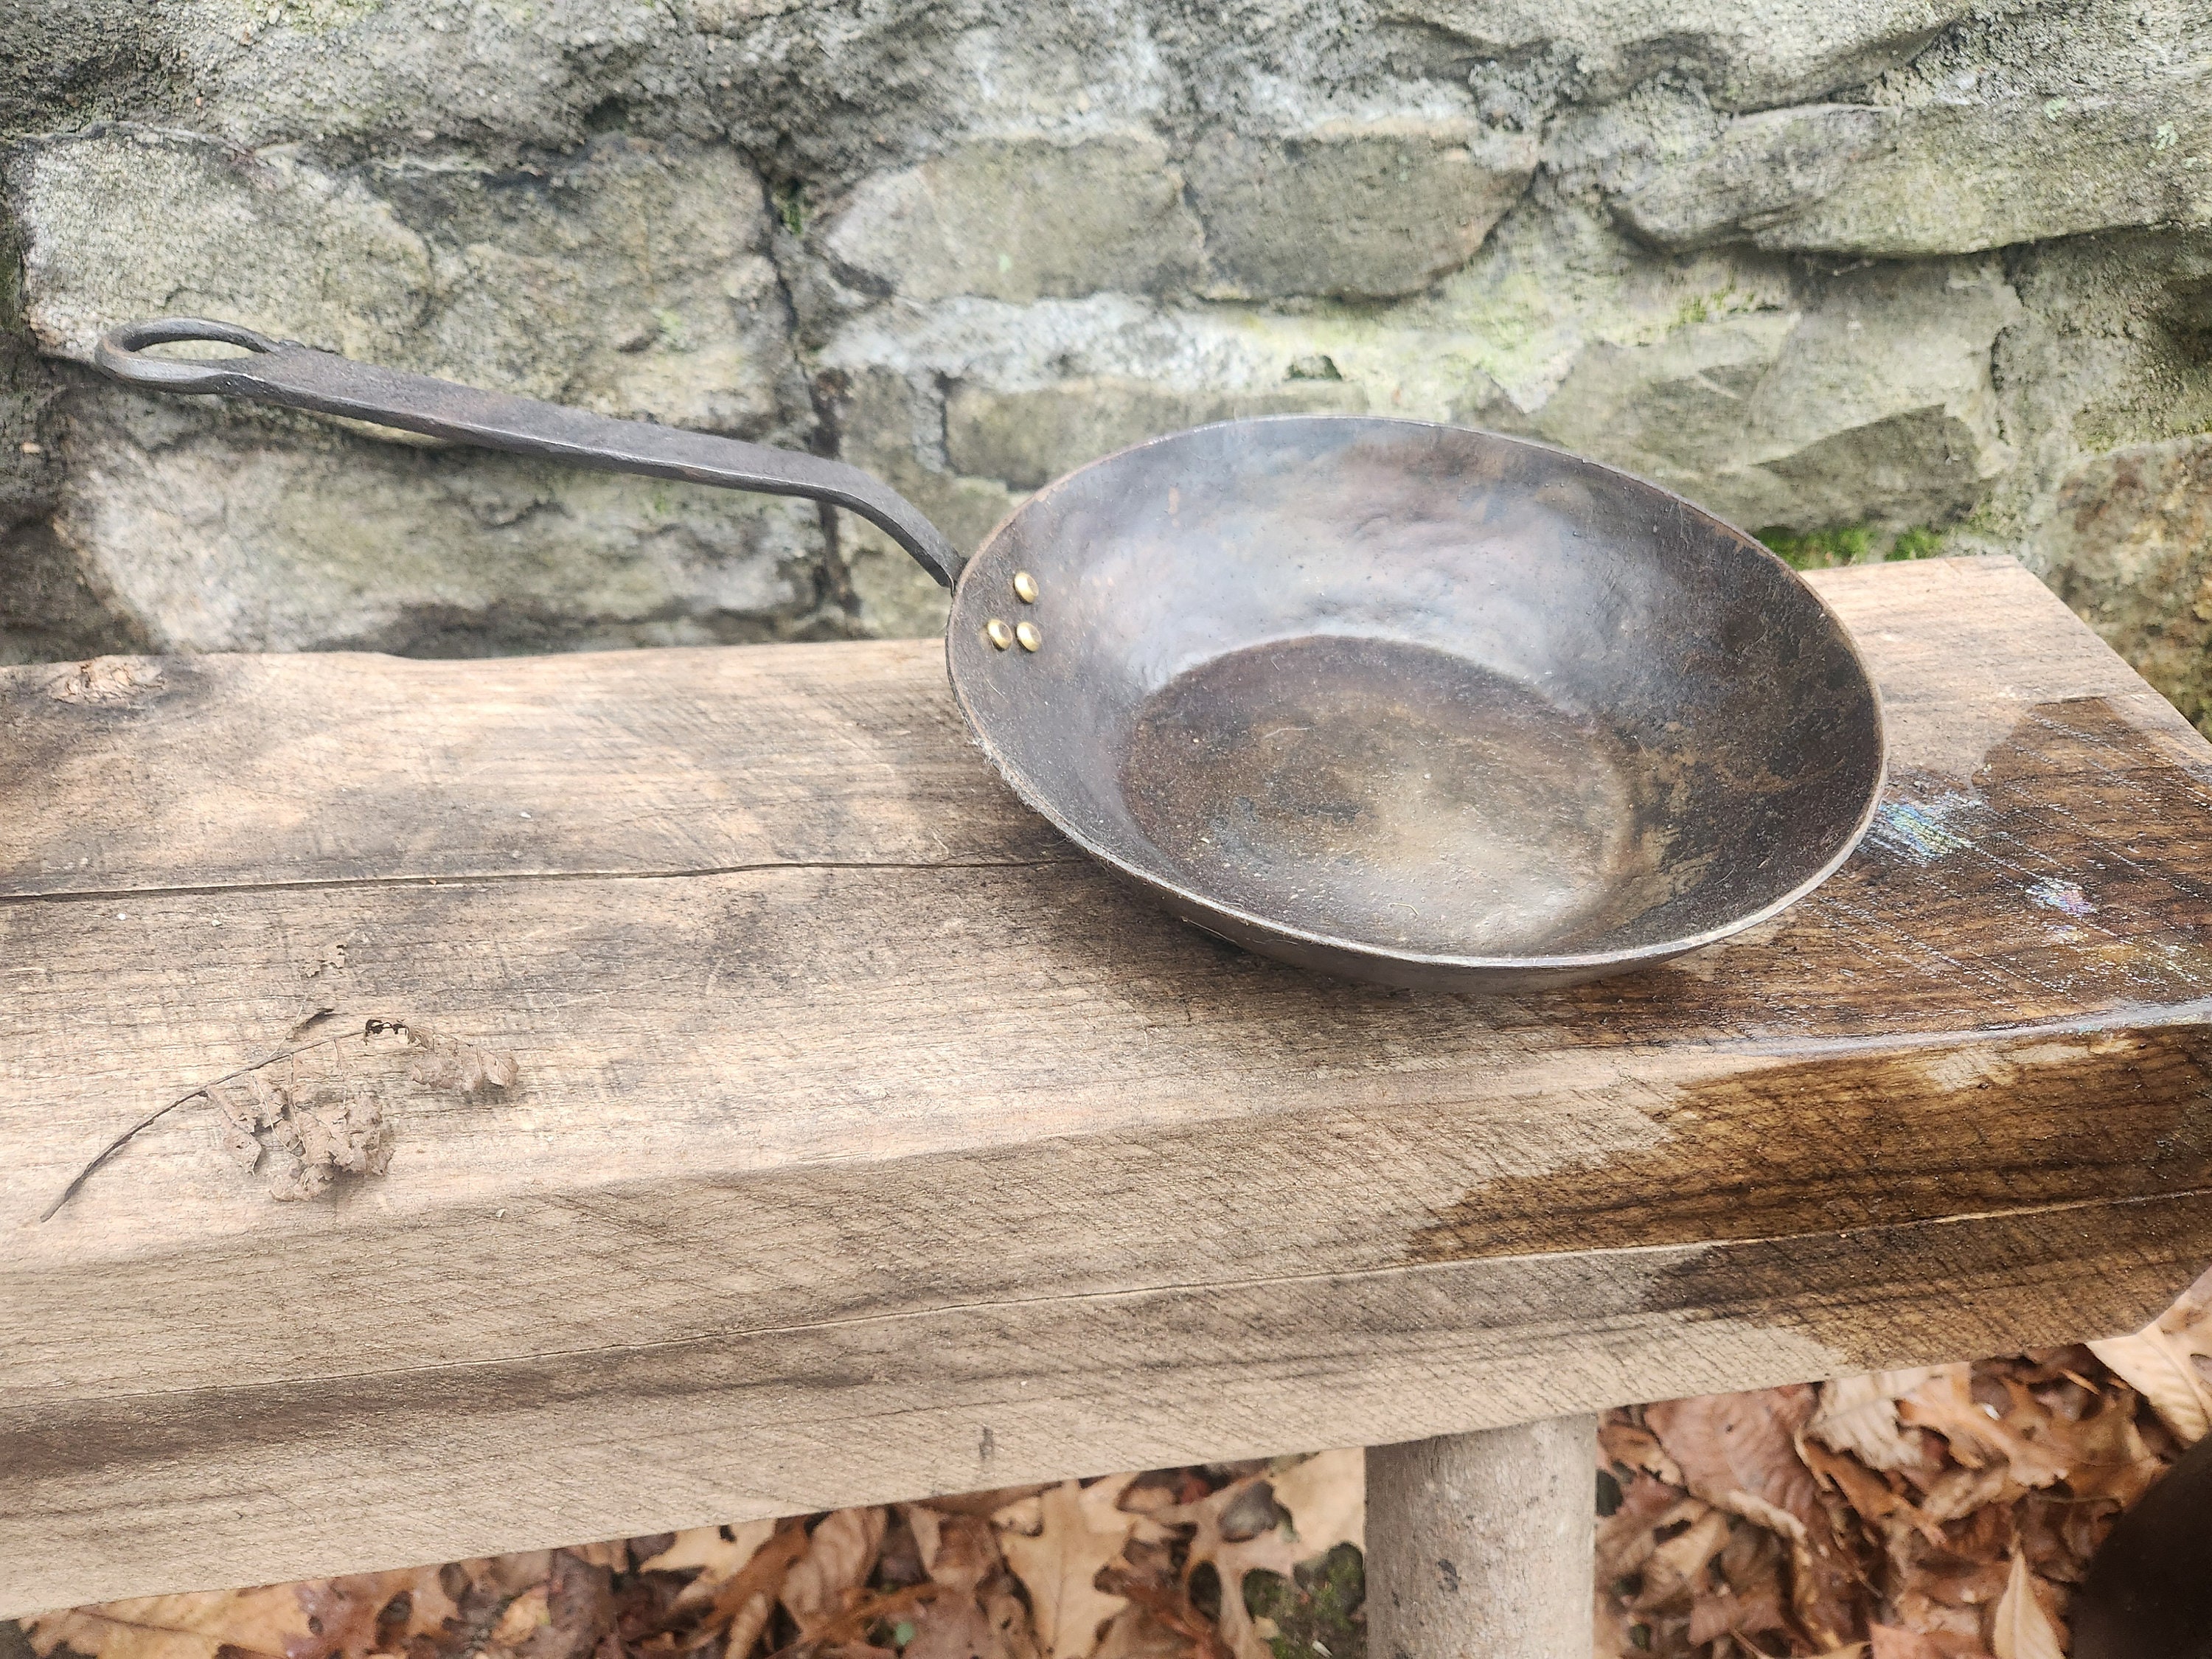 Hand Forged Steel Skillet. 6 Inch Frying Pan. Blacksmith Hand Made